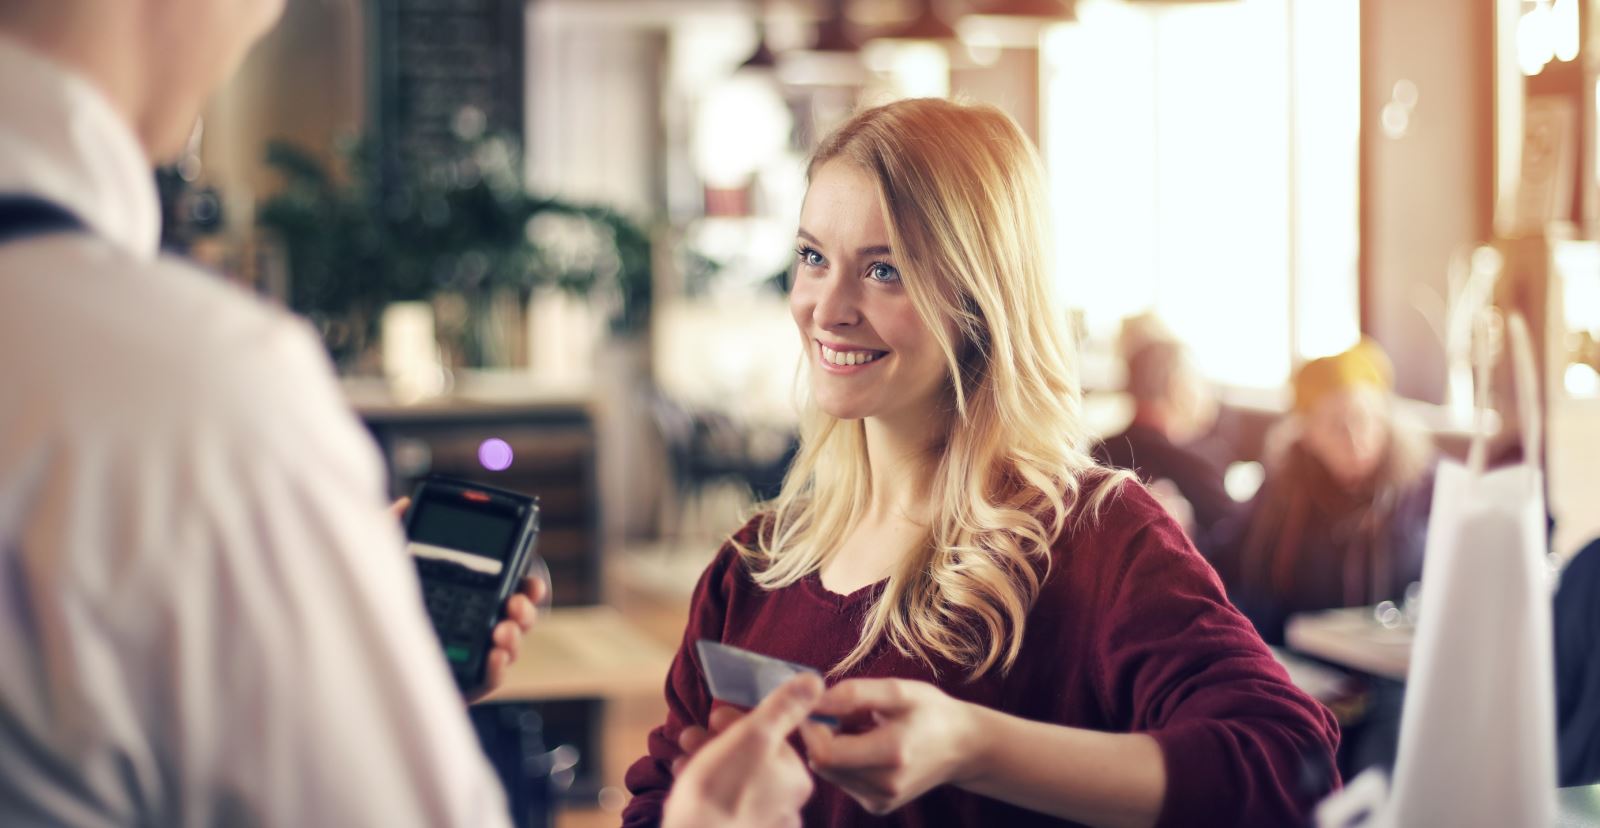 image of girl using debit card to purchase items